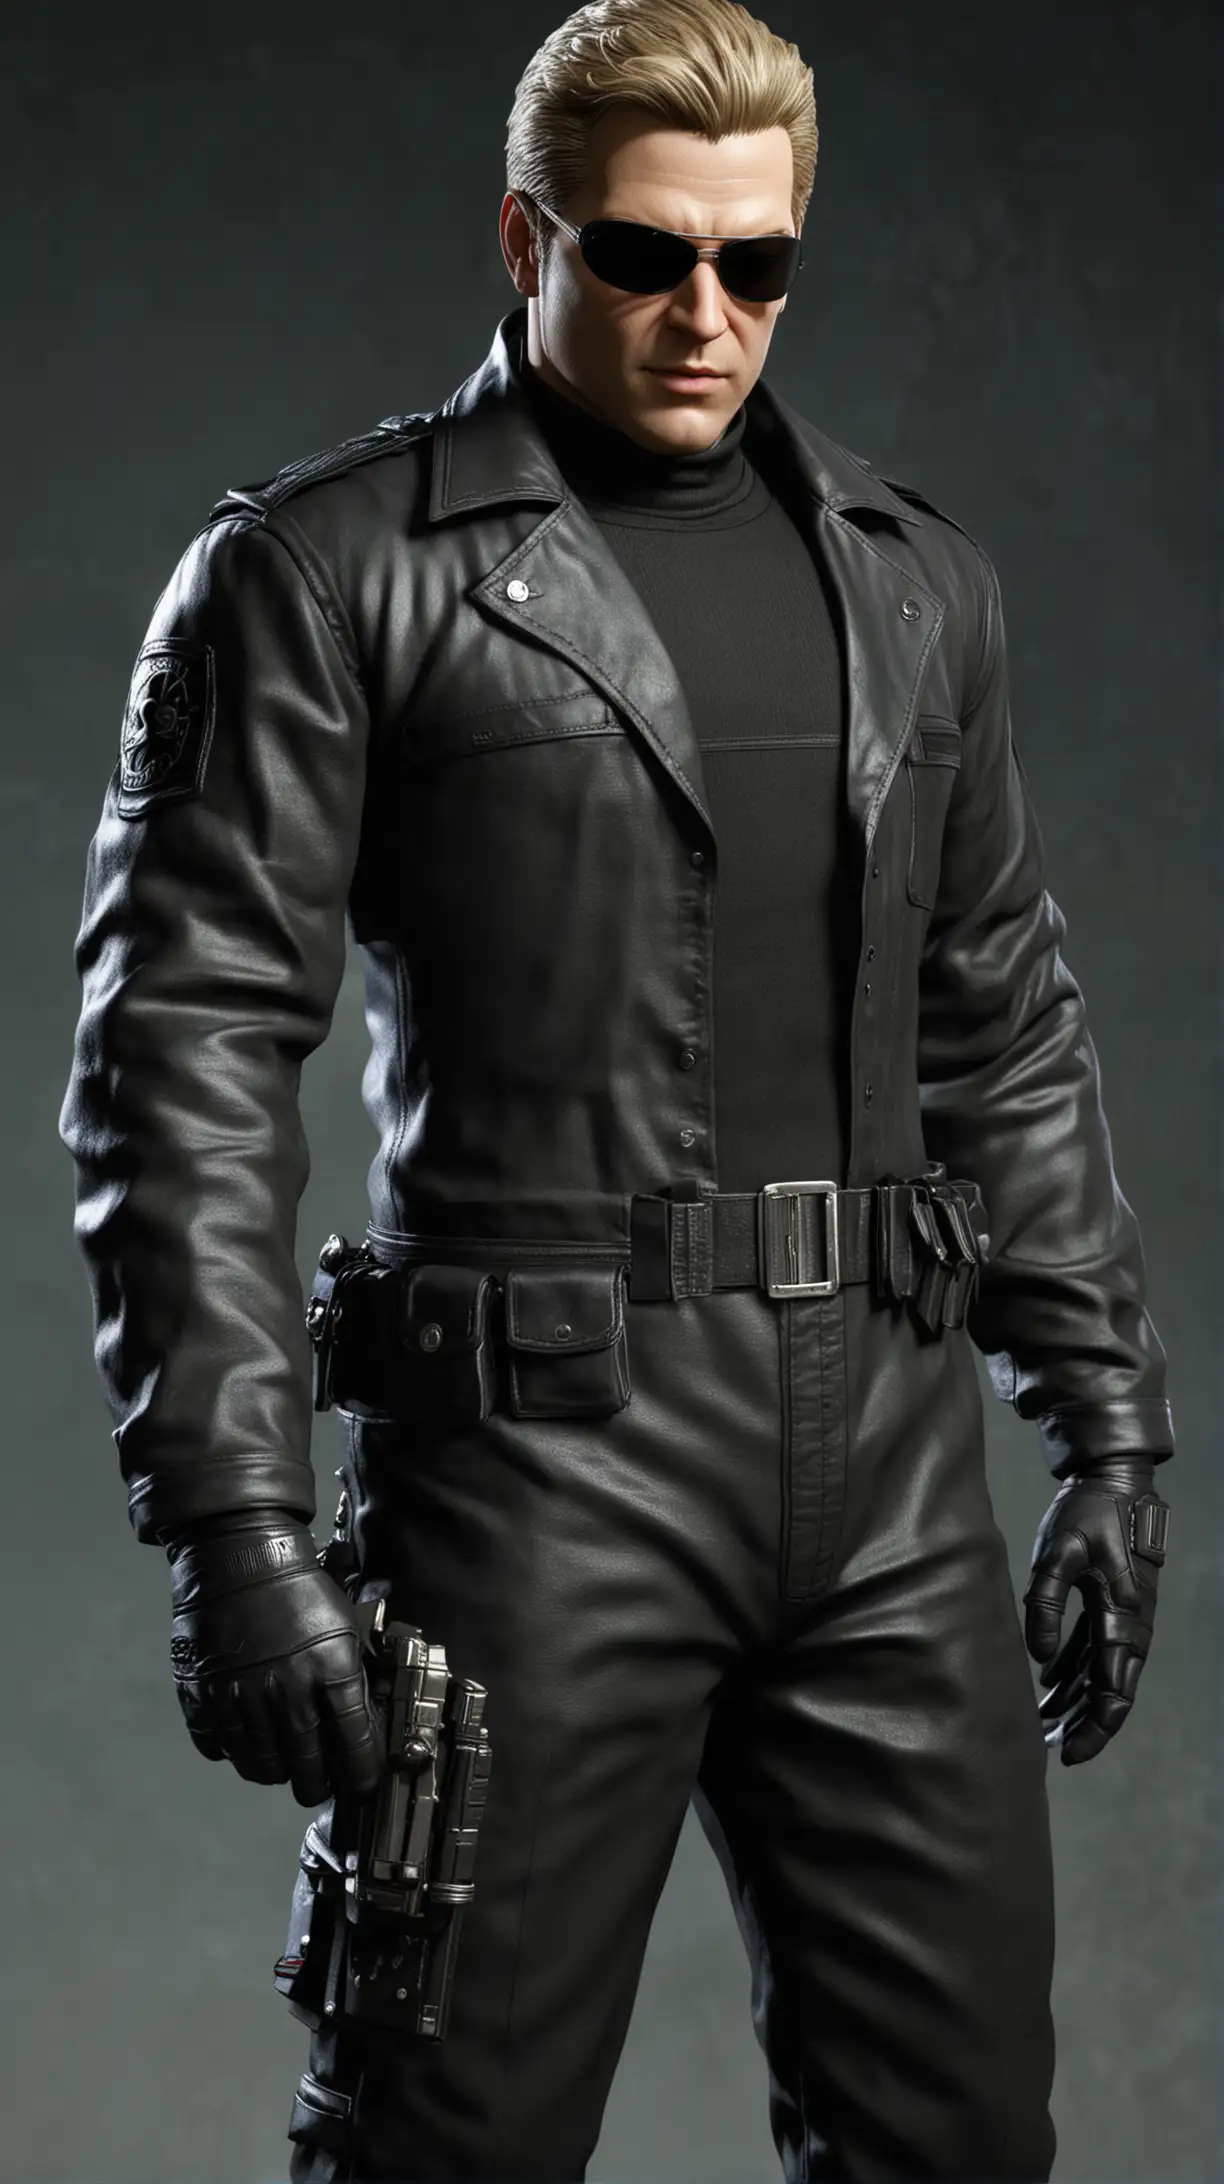 Resident Evil Albert Wesker Cosplay Stylish AllBlack Outfit and Sunglasses